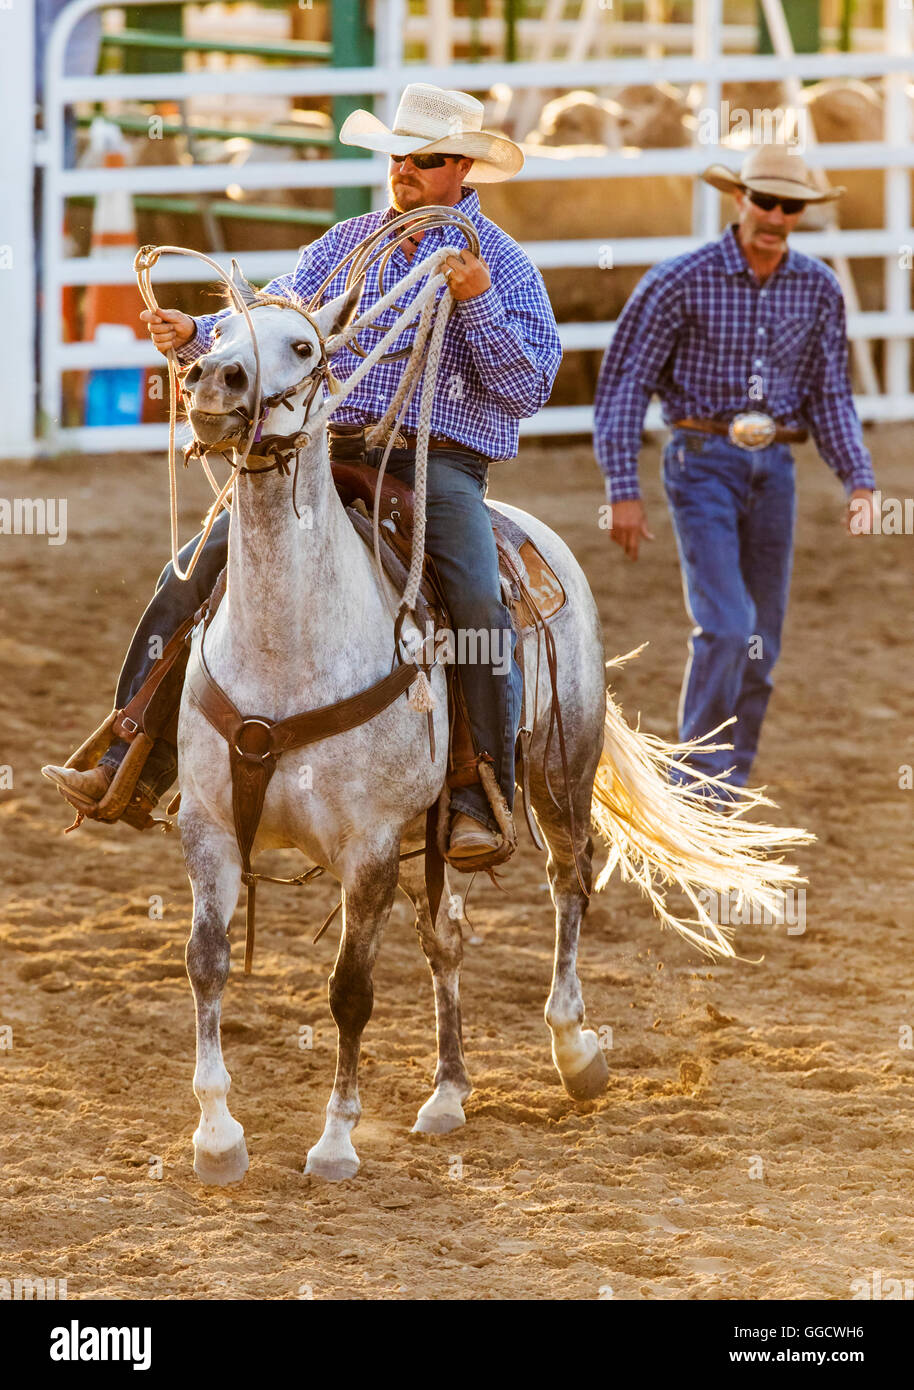 Rodeo cowboy on horseback competing in team calf roping, or tie-down roping event, Chaffee County Fair & Rodeo, Salida, Colorado Stock Photo